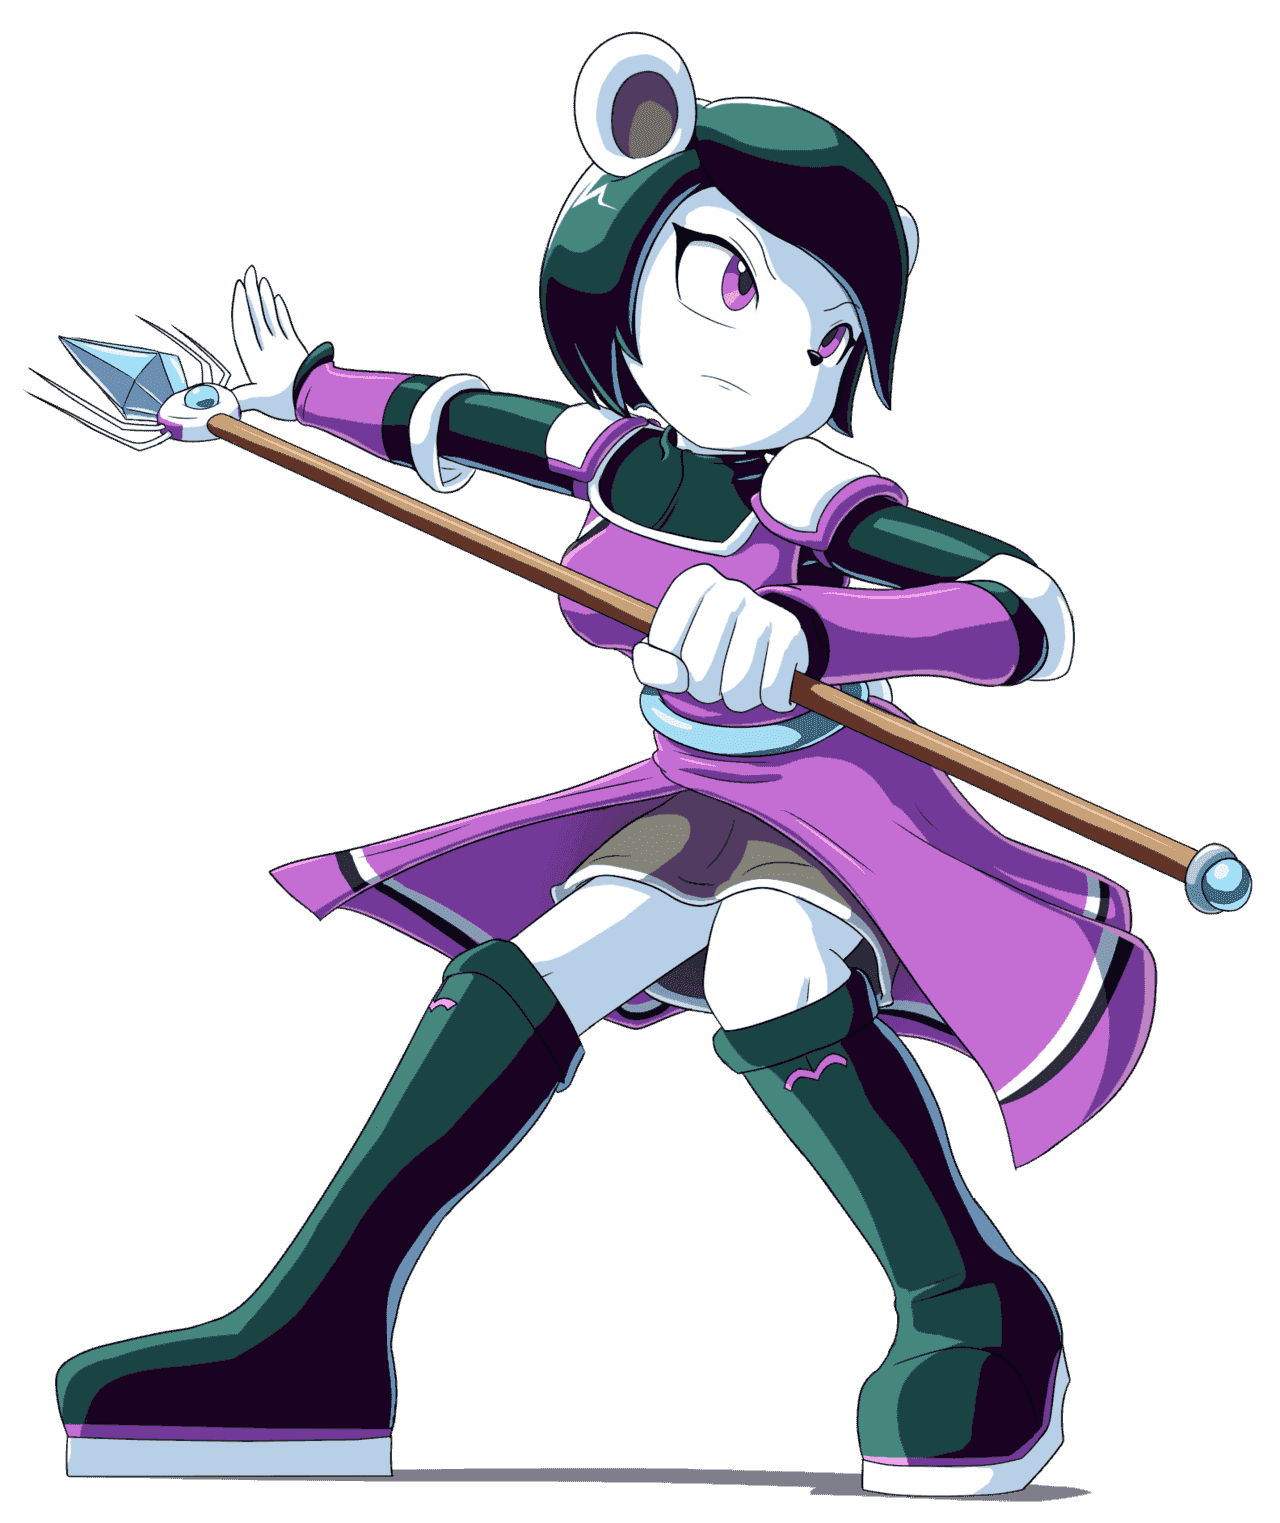 neera_fp2_by_goshaag-d9mgmsm.png